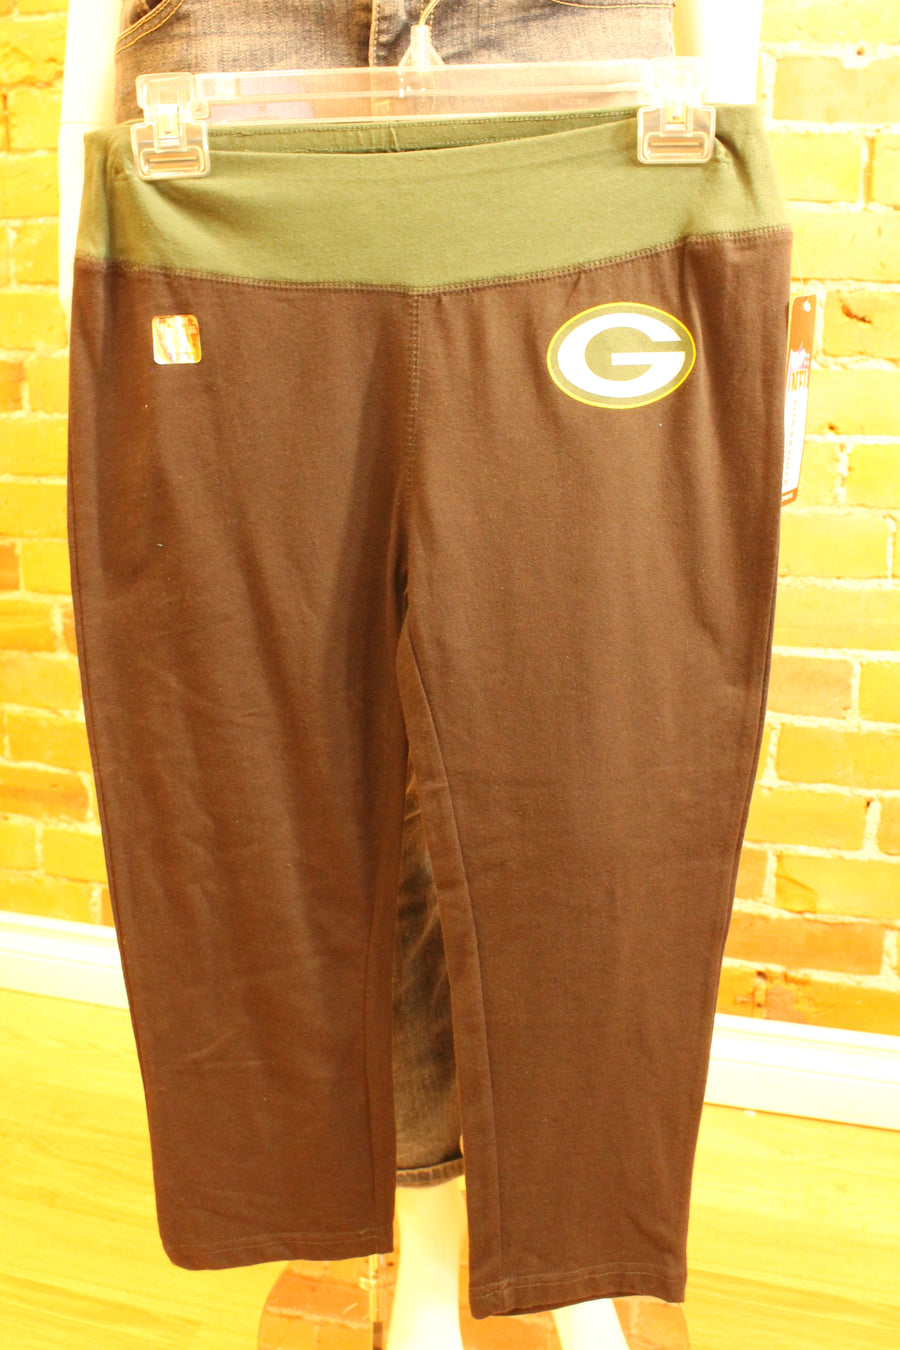 NFL Green Bay Packers Womens Capri Yoga Pant- online only